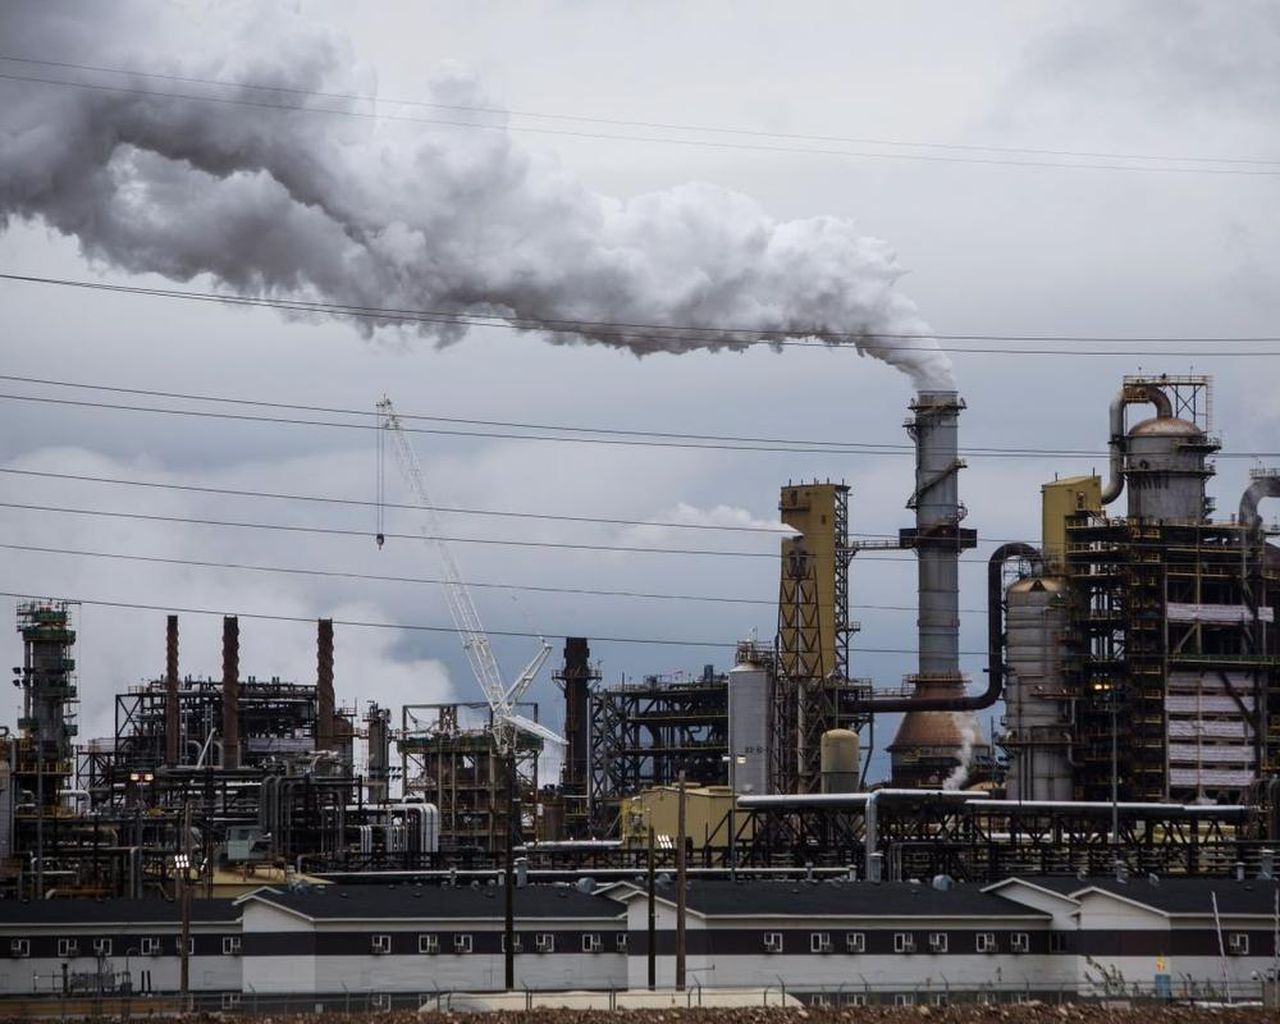 Albertans subsidizing fossil fuels at increasing rates while emissions rise: report